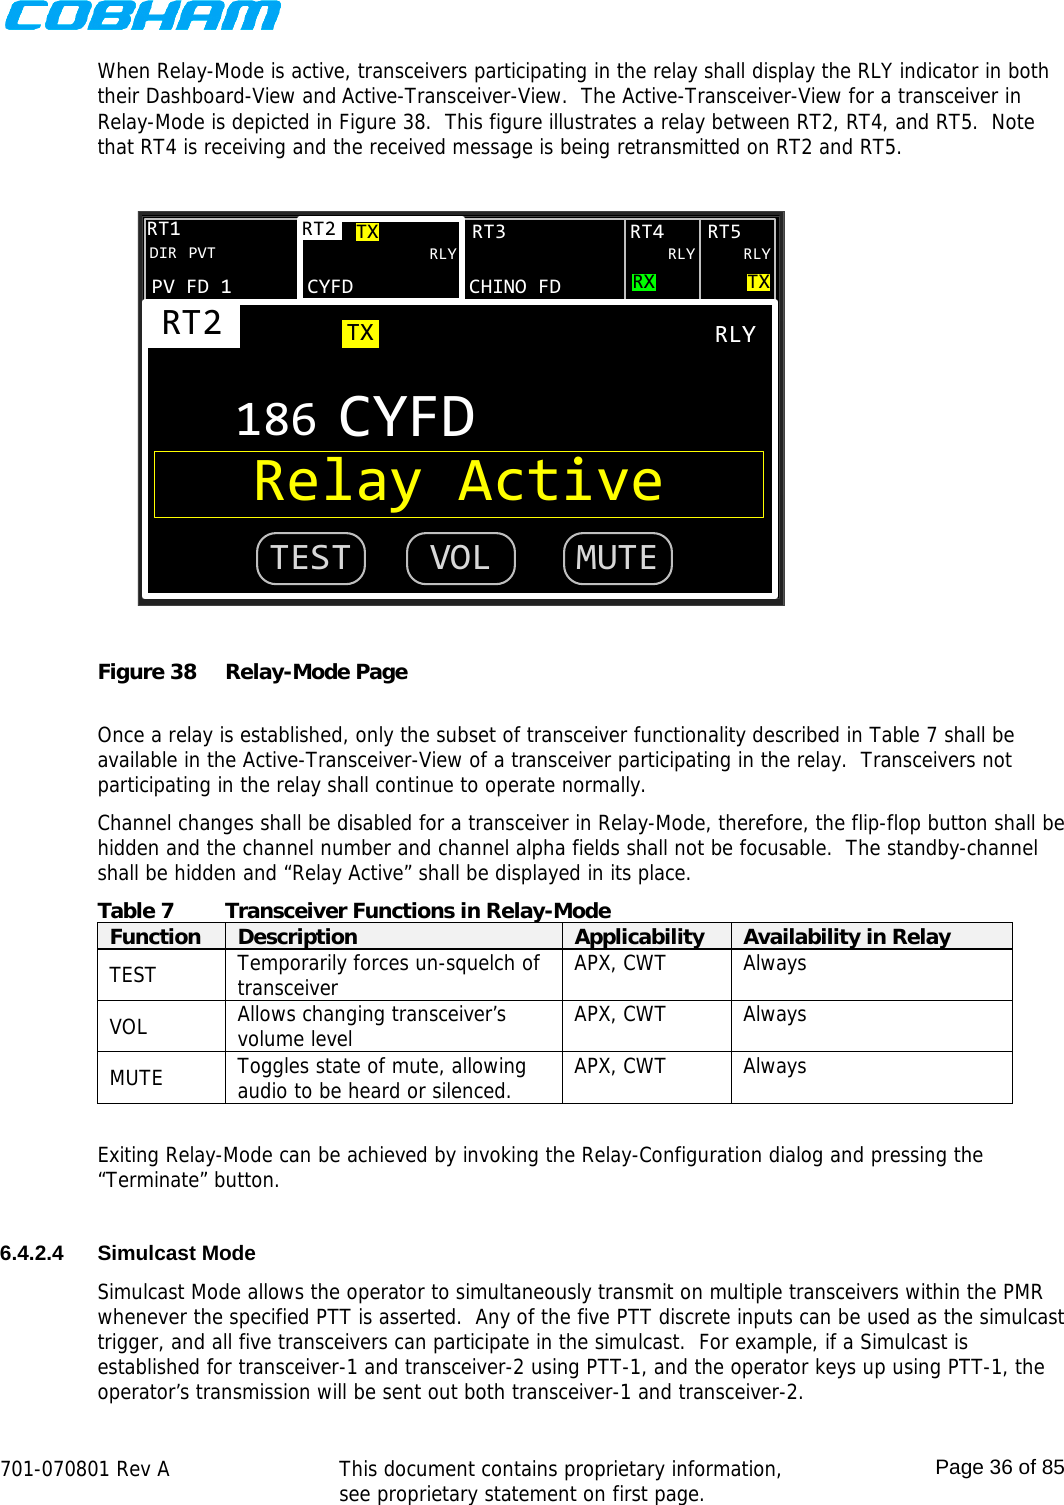    701-070801 Rev A   This document contains proprietary information, see proprietary statement on first page.  Page 36 of 85  When Relay-Mode is active, transceivers participating in the relay shall display the RLY indicator in both their Dashboard-View and Active-Transceiver-View.  The Active-Transceiver-View for a transceiver in Relay-Mode is depicted in Figure 38.  This figure illustrates a relay between RT2, RT4, and RT5.  Note that RT4 is receiving and the received message is being retransmitted on RT2 and RT5. CYFDRT2CHINO FDRT3RT2186 CYFDTXDIR PVTRT4 RT5RT1PV FD 1RLY RLYRXTXTXRLYRLYRelay ActiveTEST VOL MUTE Figure 38  Relay-Mode Page  Once a relay is established, only the subset of transceiver functionality described in Table 7 shall be available in the Active-Transceiver-View of a transceiver participating in the relay.  Transceivers not participating in the relay shall continue to operate normally. Channel changes shall be disabled for a transceiver in Relay-Mode, therefore, the flip-flop button shall be hidden and the channel number and channel alpha fields shall not be focusable.  The standby-channel shall be hidden and “Relay Active” shall be displayed in its place. Table 7  Transceiver Functions in Relay-Mode Function  Description  Applicability  Availability in Relay TEST  Temporarily forces un-squelch of transceiver  APX, CWT  Always VOL  Allows changing transceiver’s volume level  APX, CWT  Always MUTE  Toggles state of mute, allowing audio to be heard or silenced.  APX, CWT  Always  Exiting Relay-Mode can be achieved by invoking the Relay-Configuration dialog and pressing the “Terminate” button.  6.4.2.4 Simulcast Mode Simulcast Mode allows the operator to simultaneously transmit on multiple transceivers within the PMR whenever the specified PTT is asserted.  Any of the five PTT discrete inputs can be used as the simulcast trigger, and all five transceivers can participate in the simulcast.  For example, if a Simulcast is established for transceiver-1 and transceiver-2 using PTT-1, and the operator keys up using PTT-1, the operator’s transmission will be sent out both transceiver-1 and transceiver-2. 